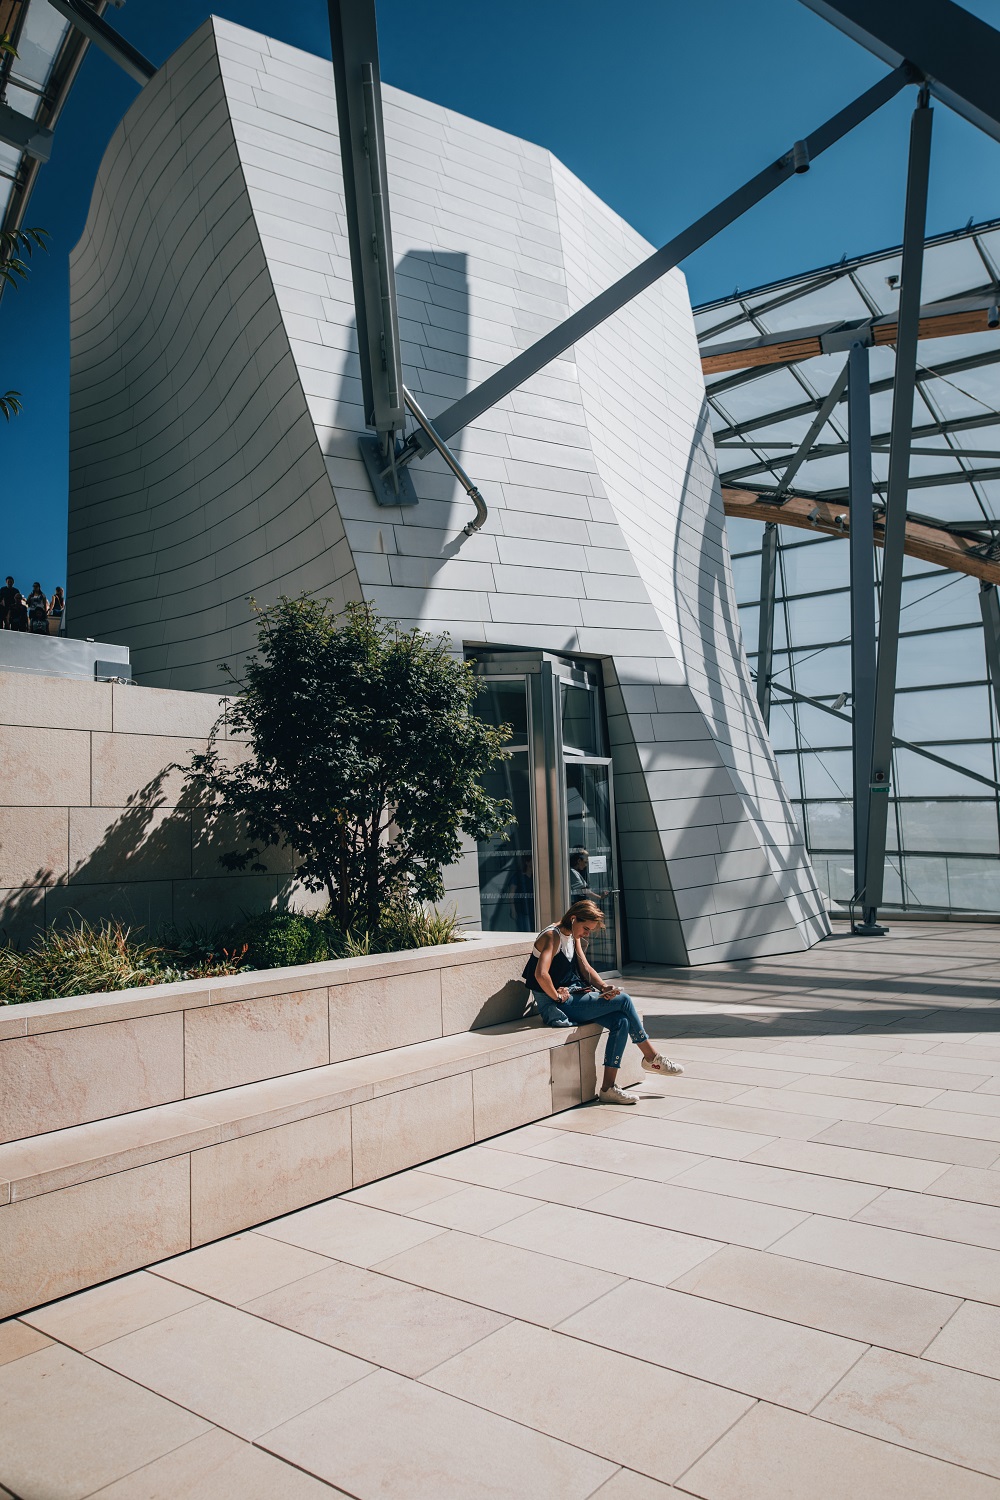 Louis Vuitton Foundation Building in Paris by Frank Gehry : r